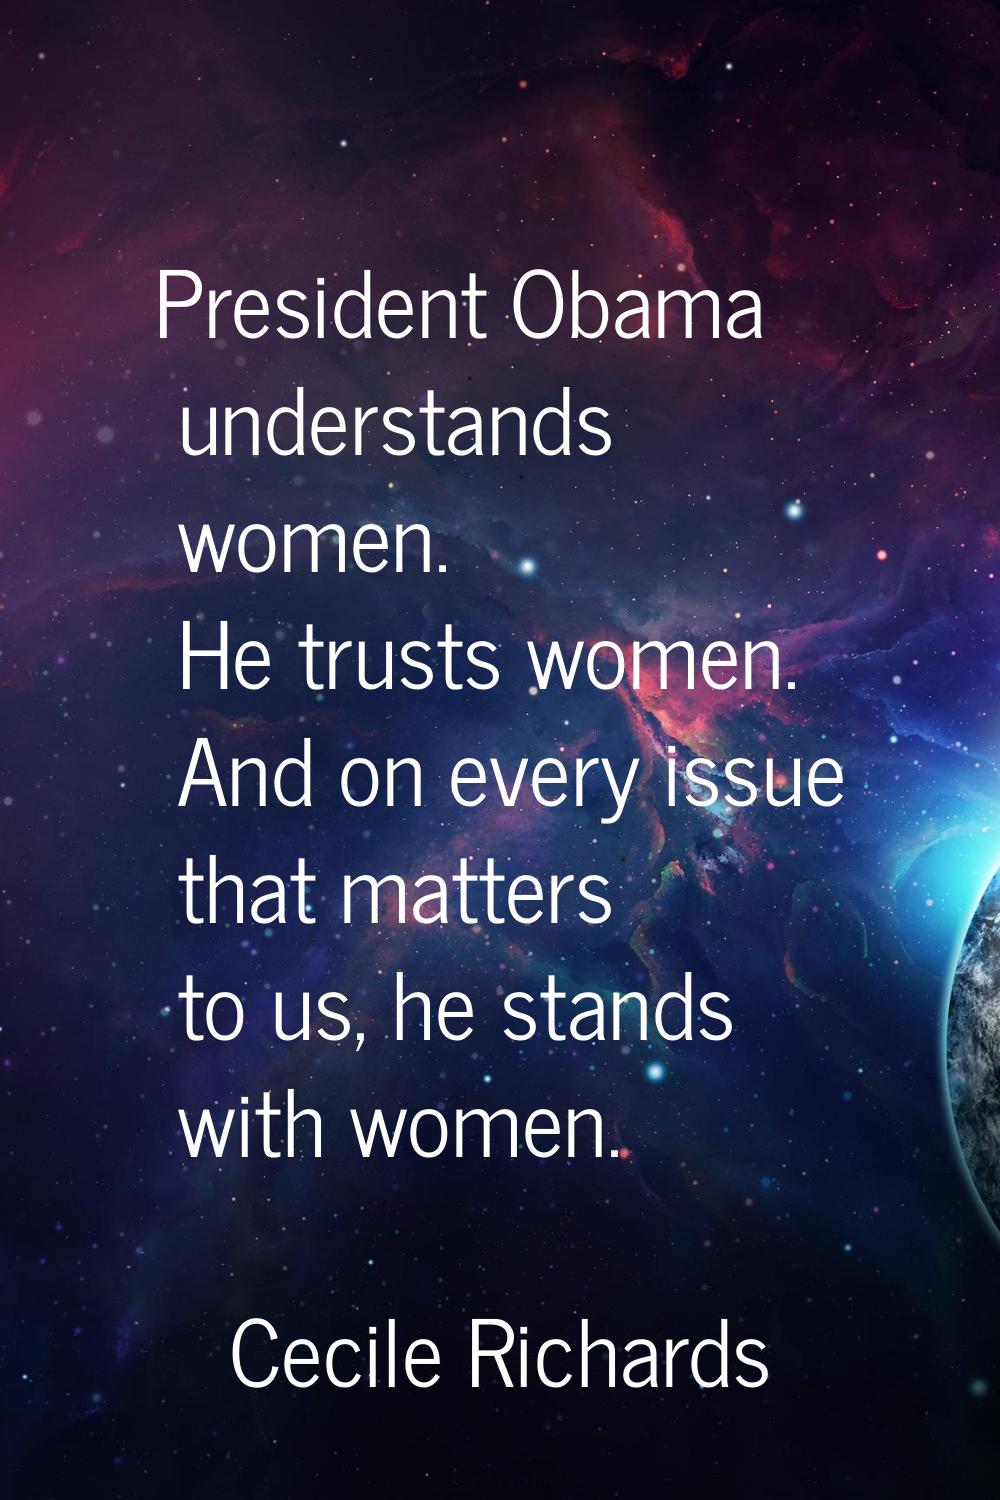 President Obama understands women. He trusts women. And on every issue that matters to us, he stand